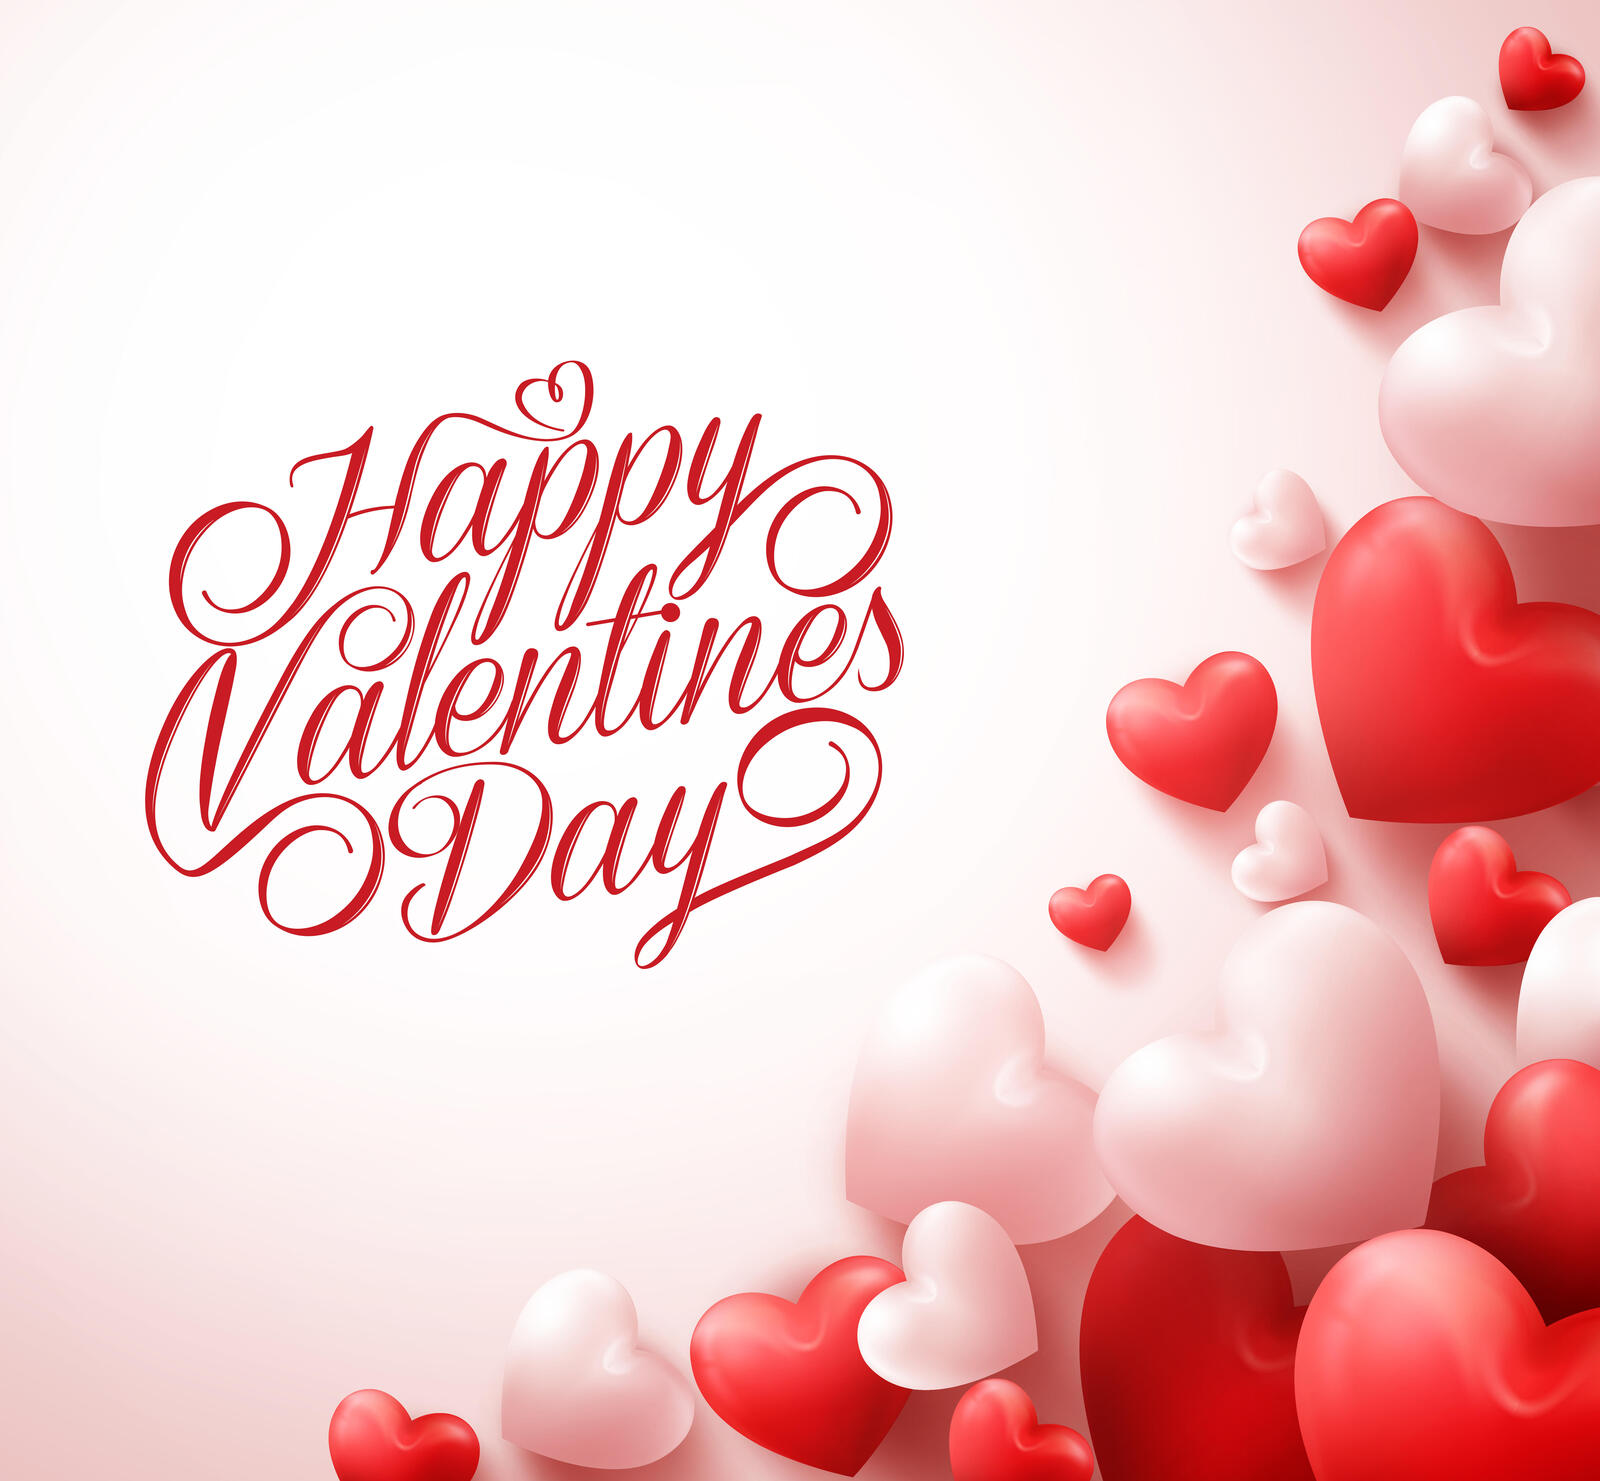 Wallpapers holidays text happy valentine`s day on the desktop